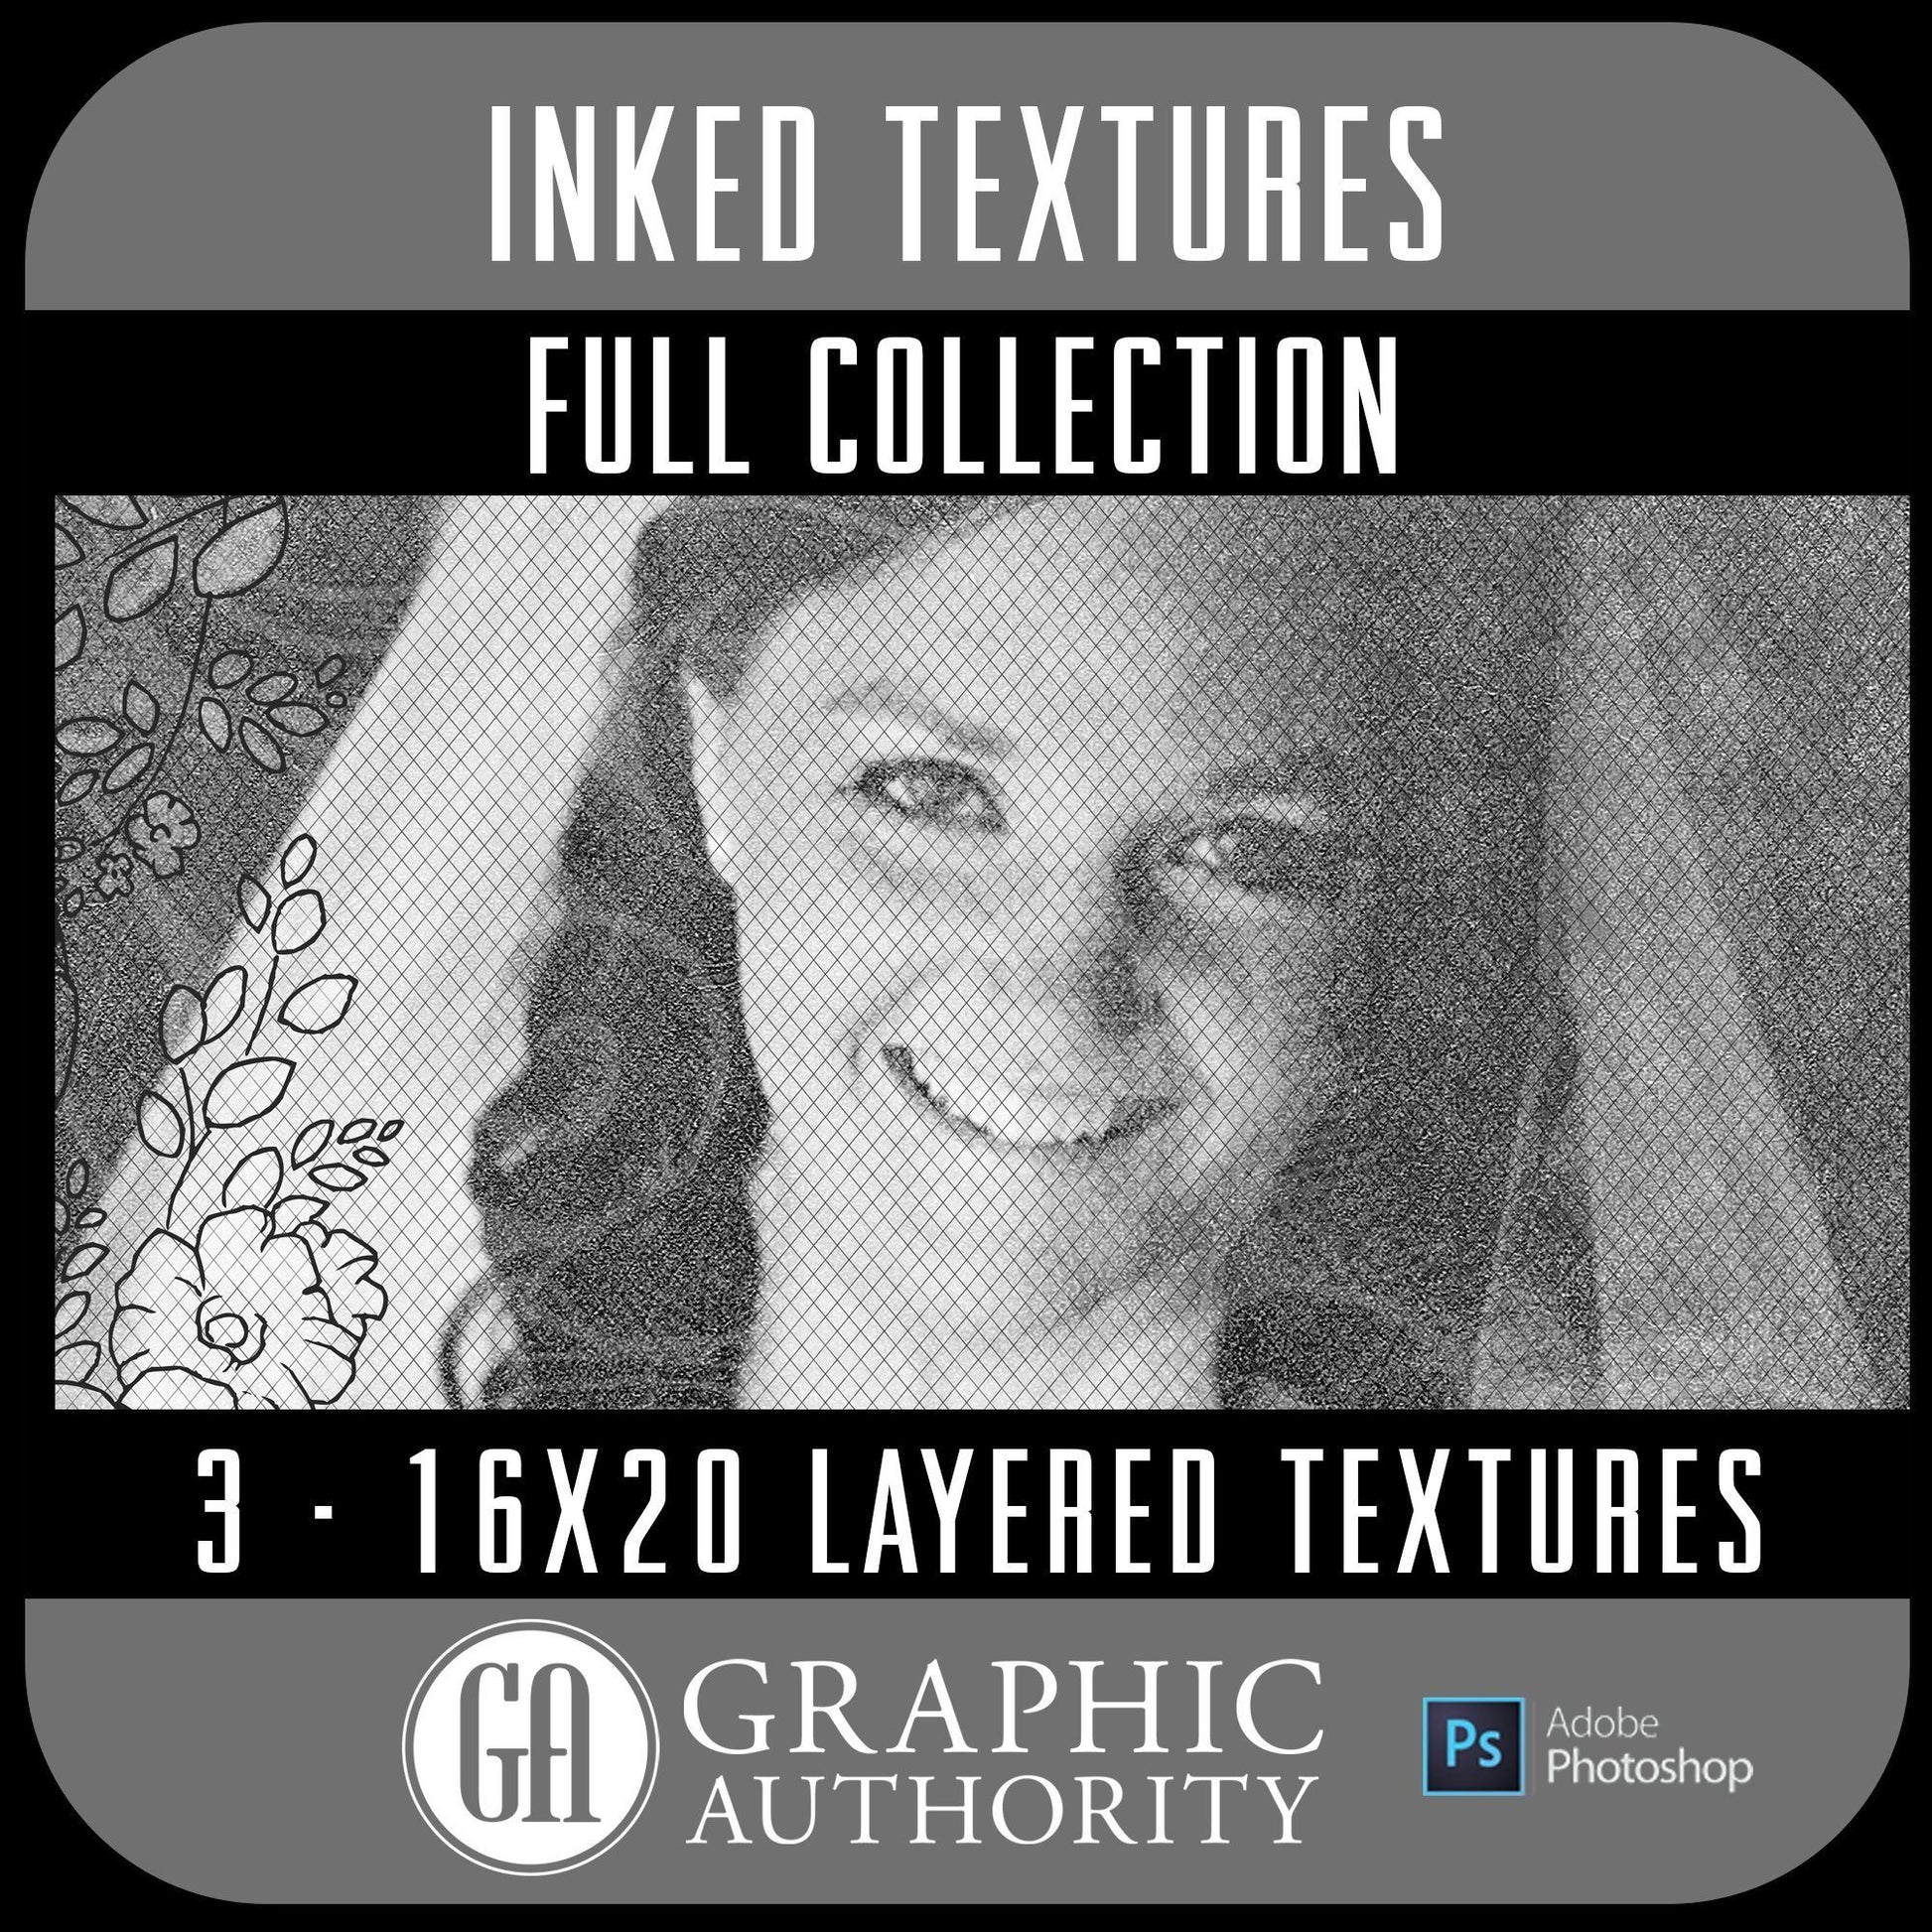 Inked - 16x20 Layered Textures - Full Collection-Photoshop Template - Graphic Authority